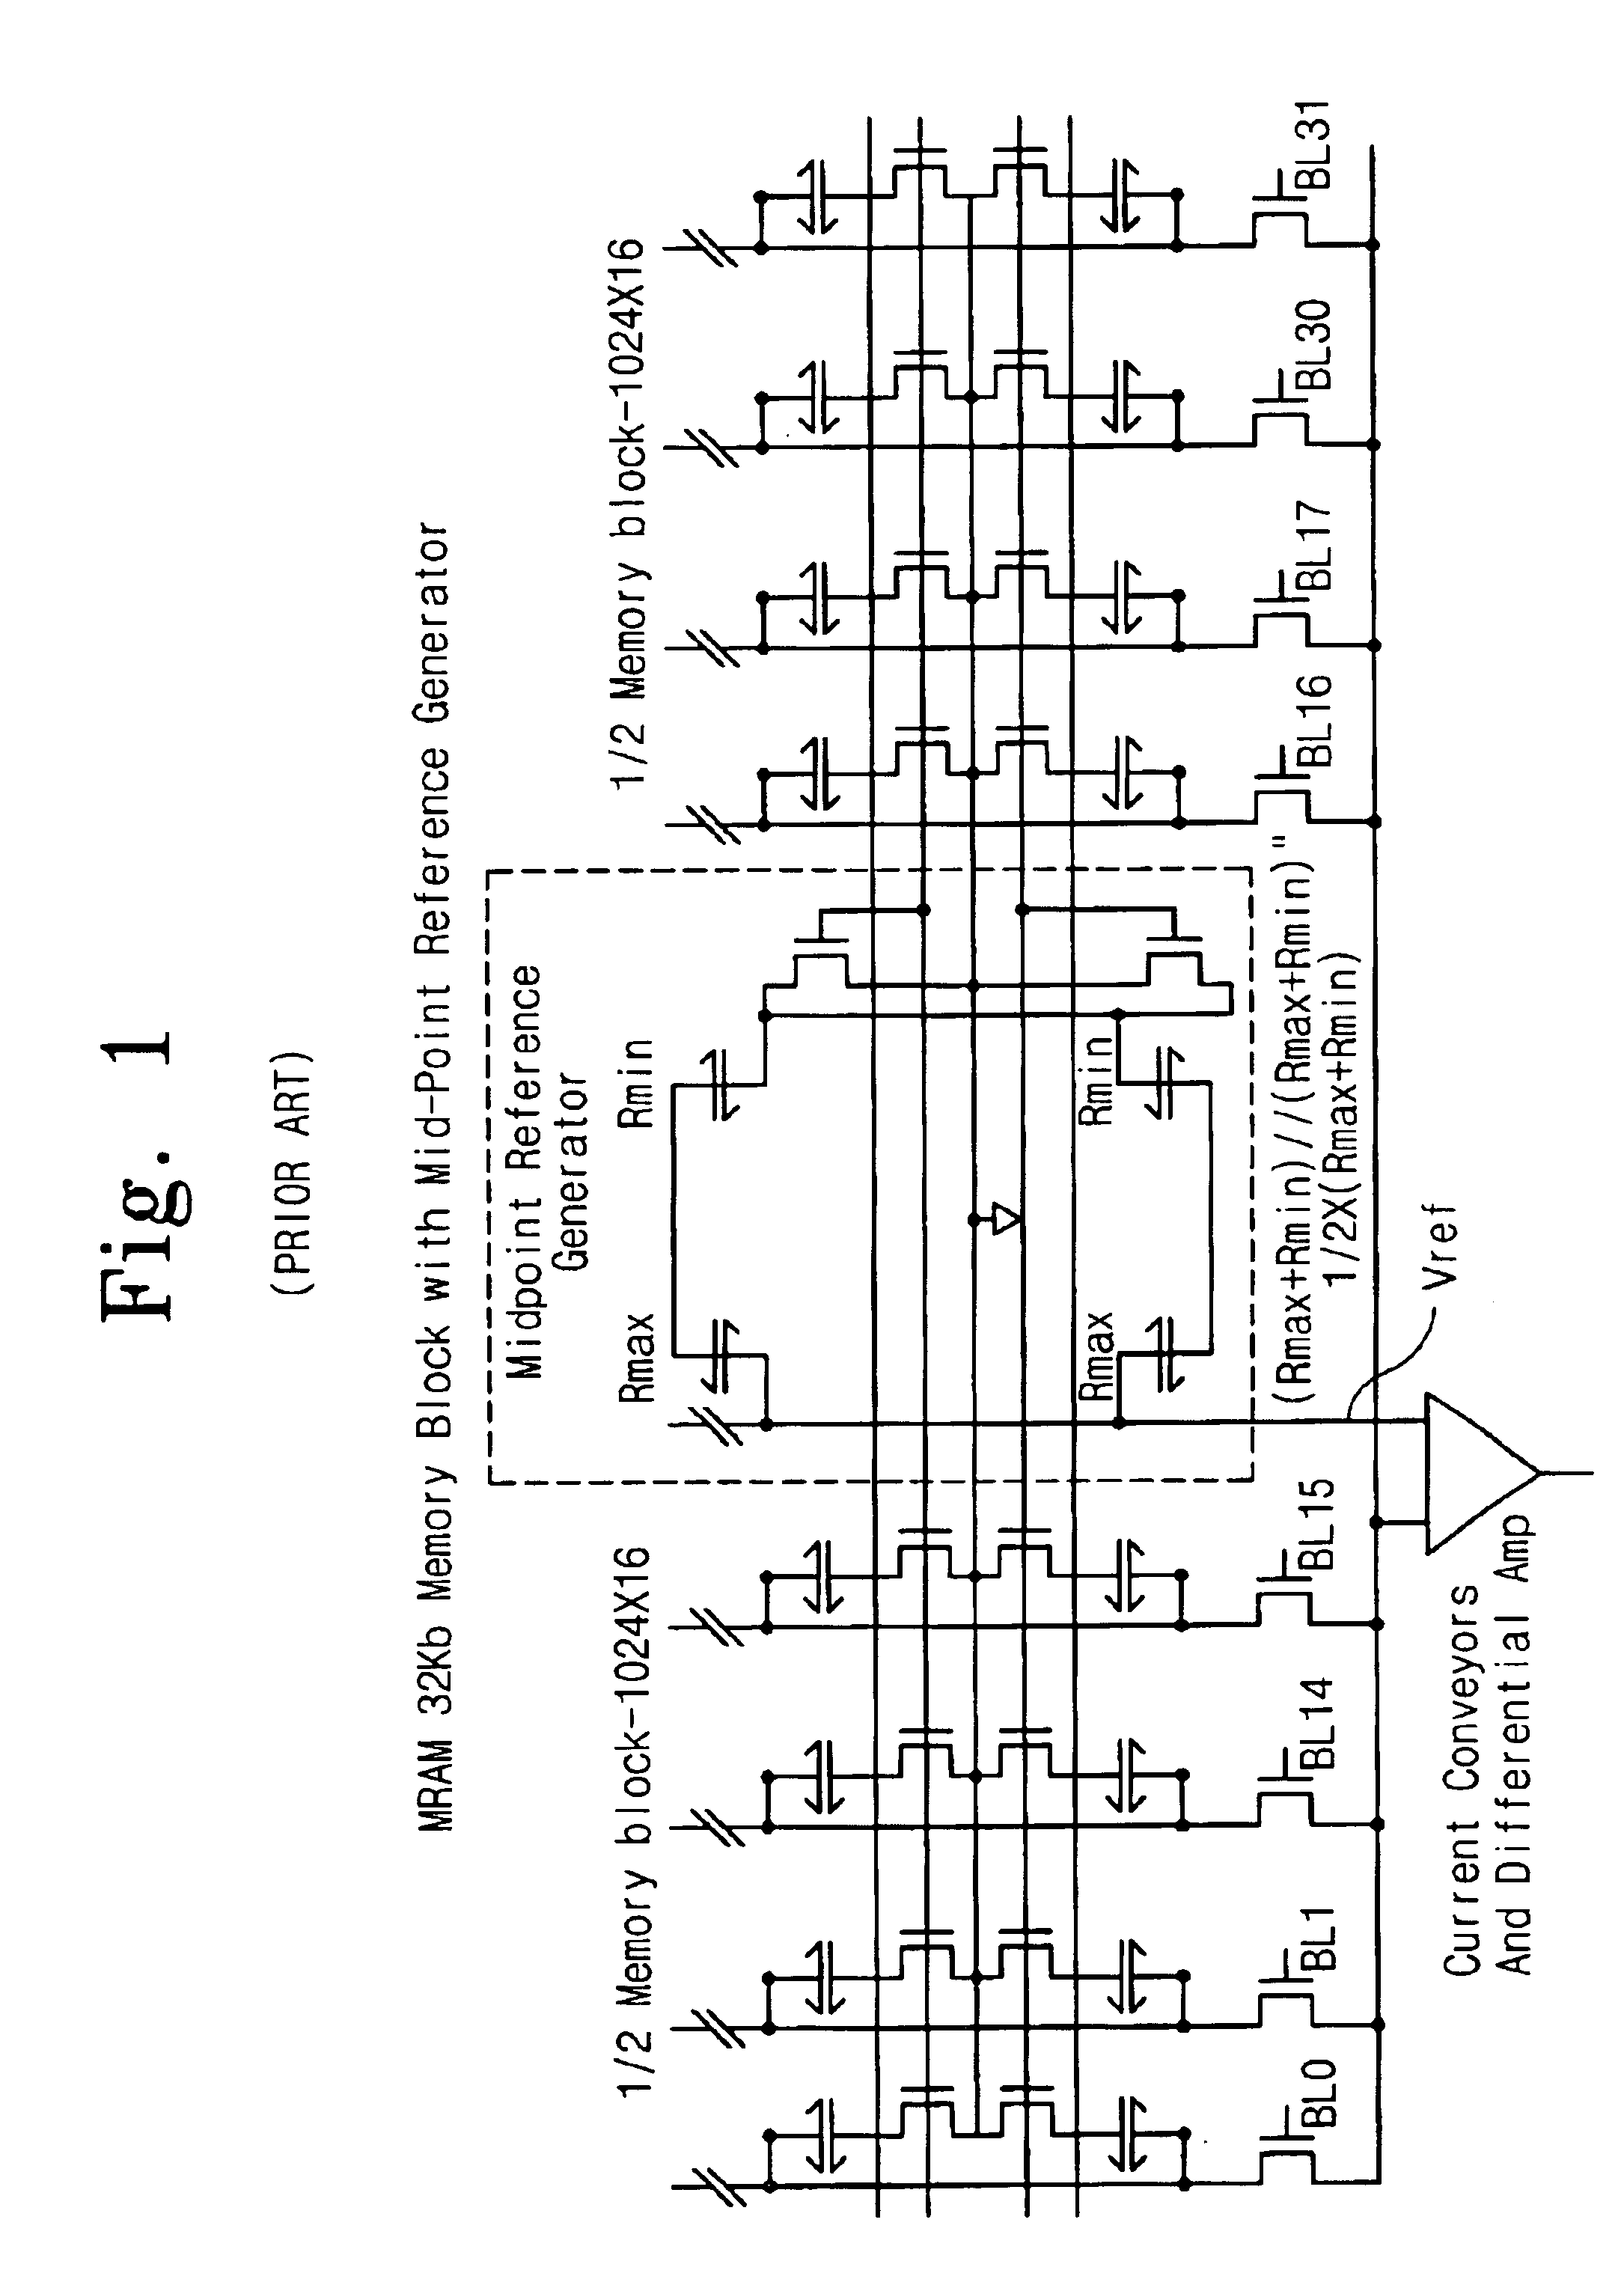 Magnetic memory device implementing read operation tolerant to bitline clamp voltage (VREF)